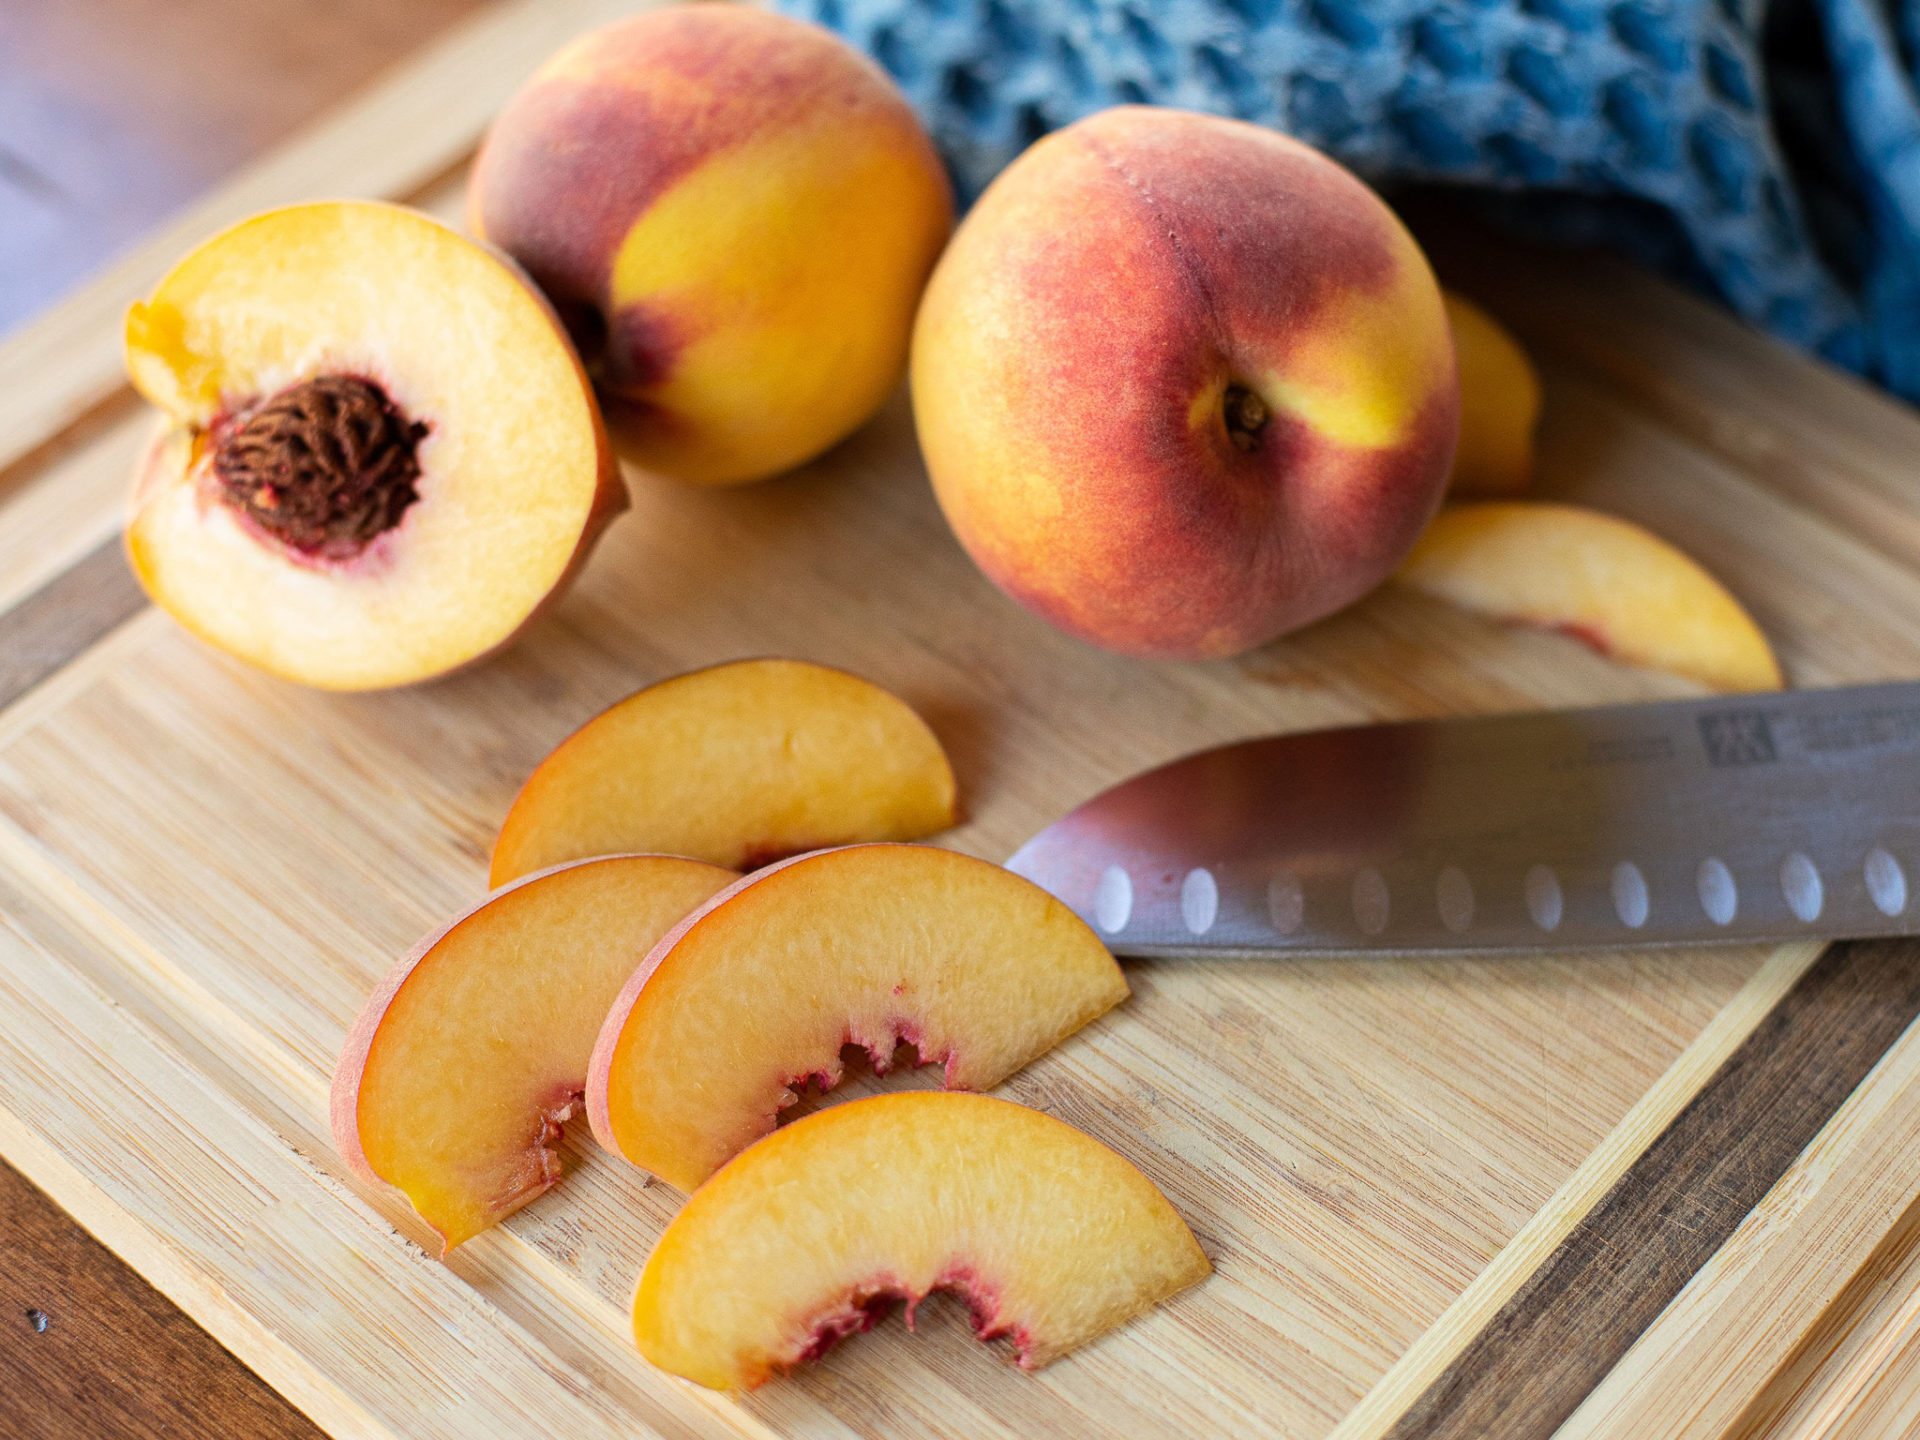 Southern Peaches Just 87¢ Per Pound At Kroger